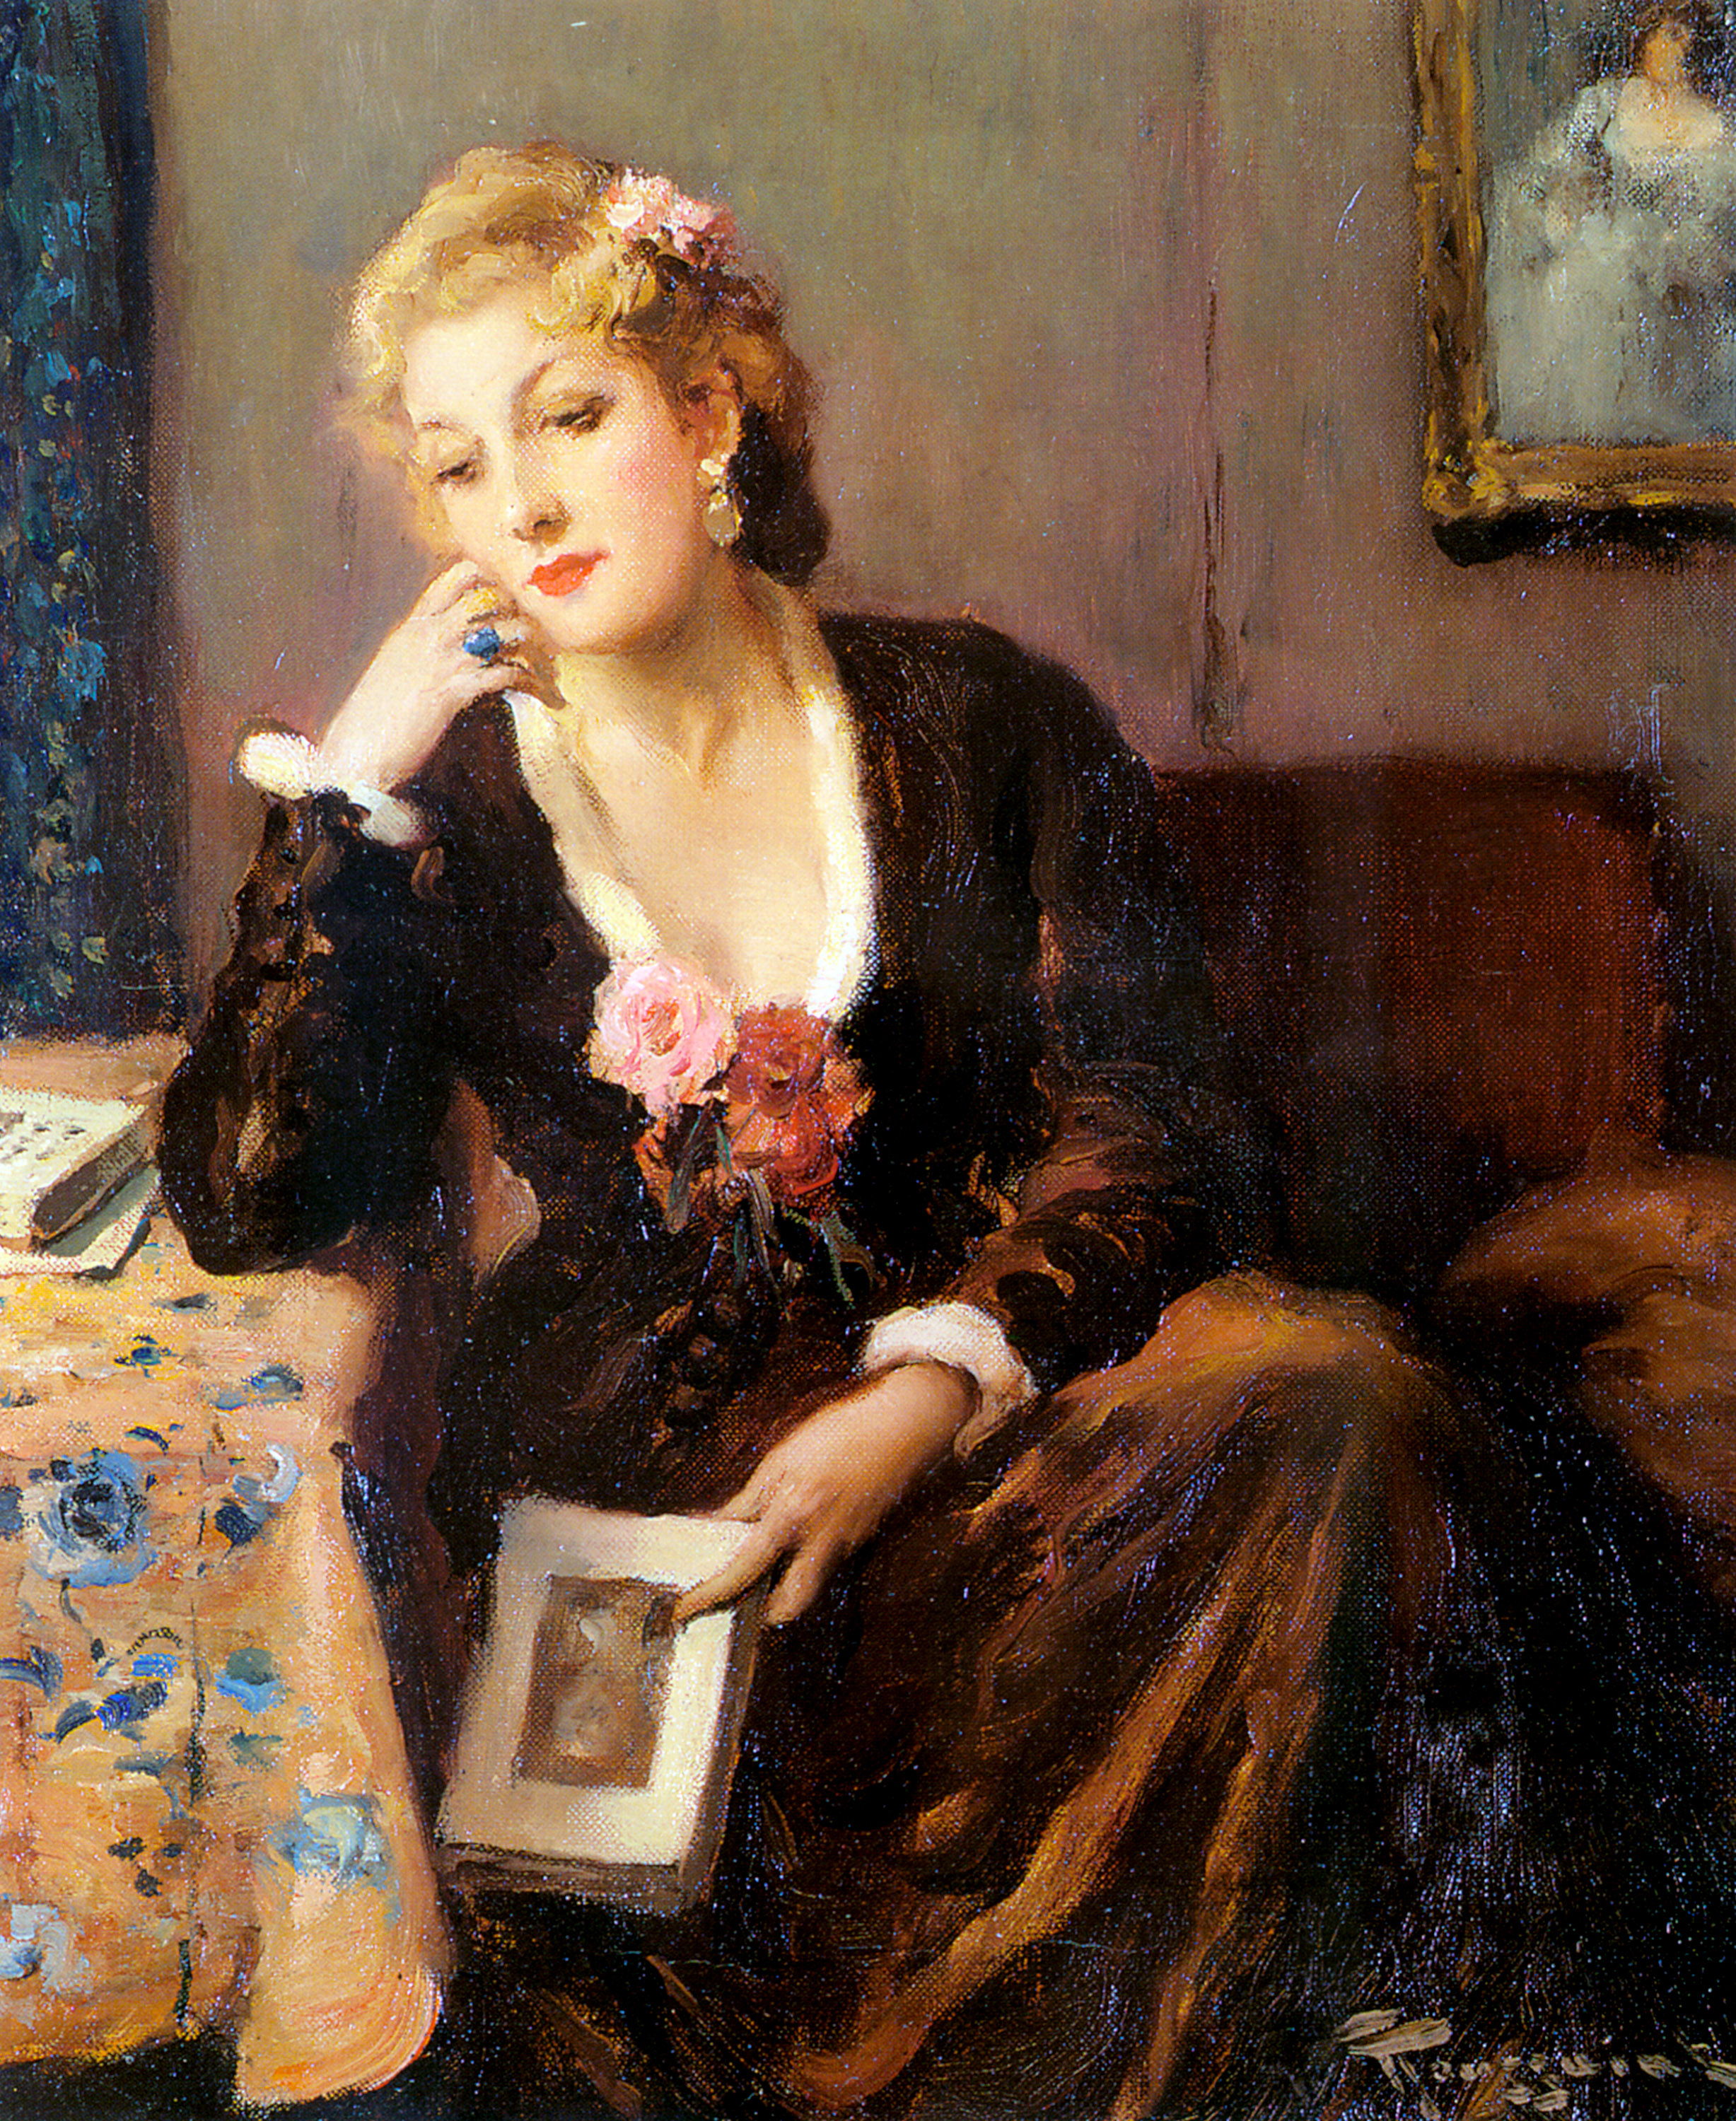 Faraway Thoughts by Fernand Toussaint